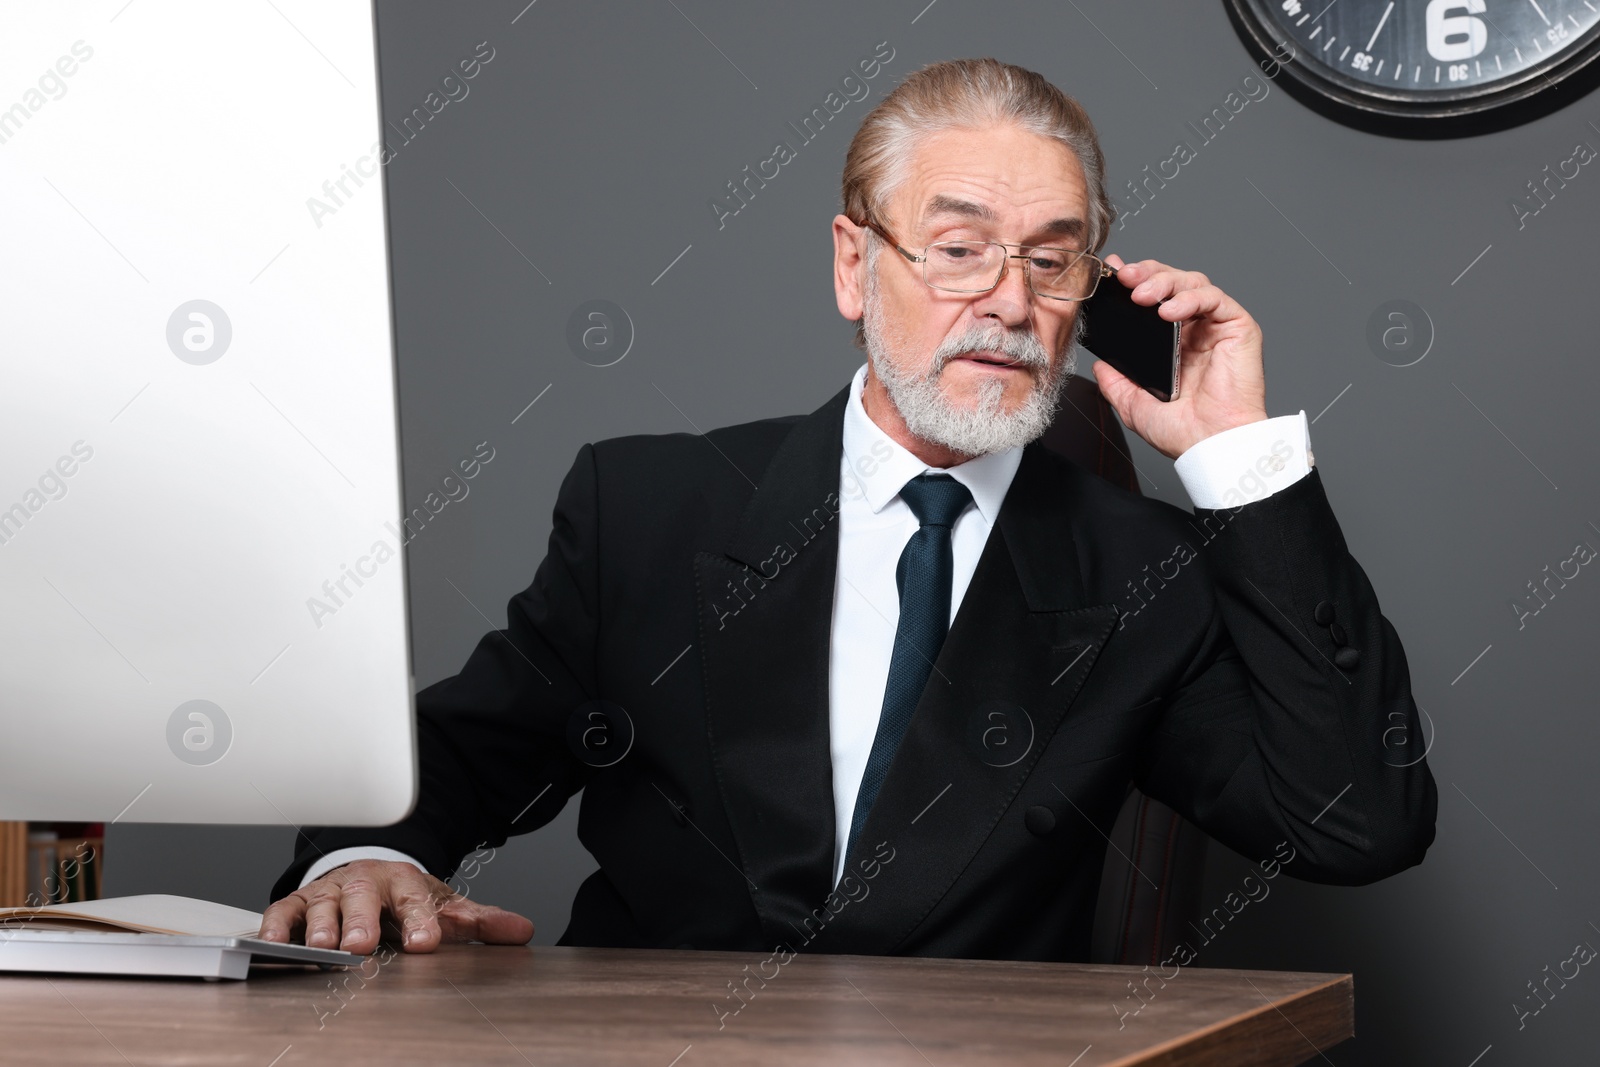 Photo of Senior boss talking on phone at wooden table in office